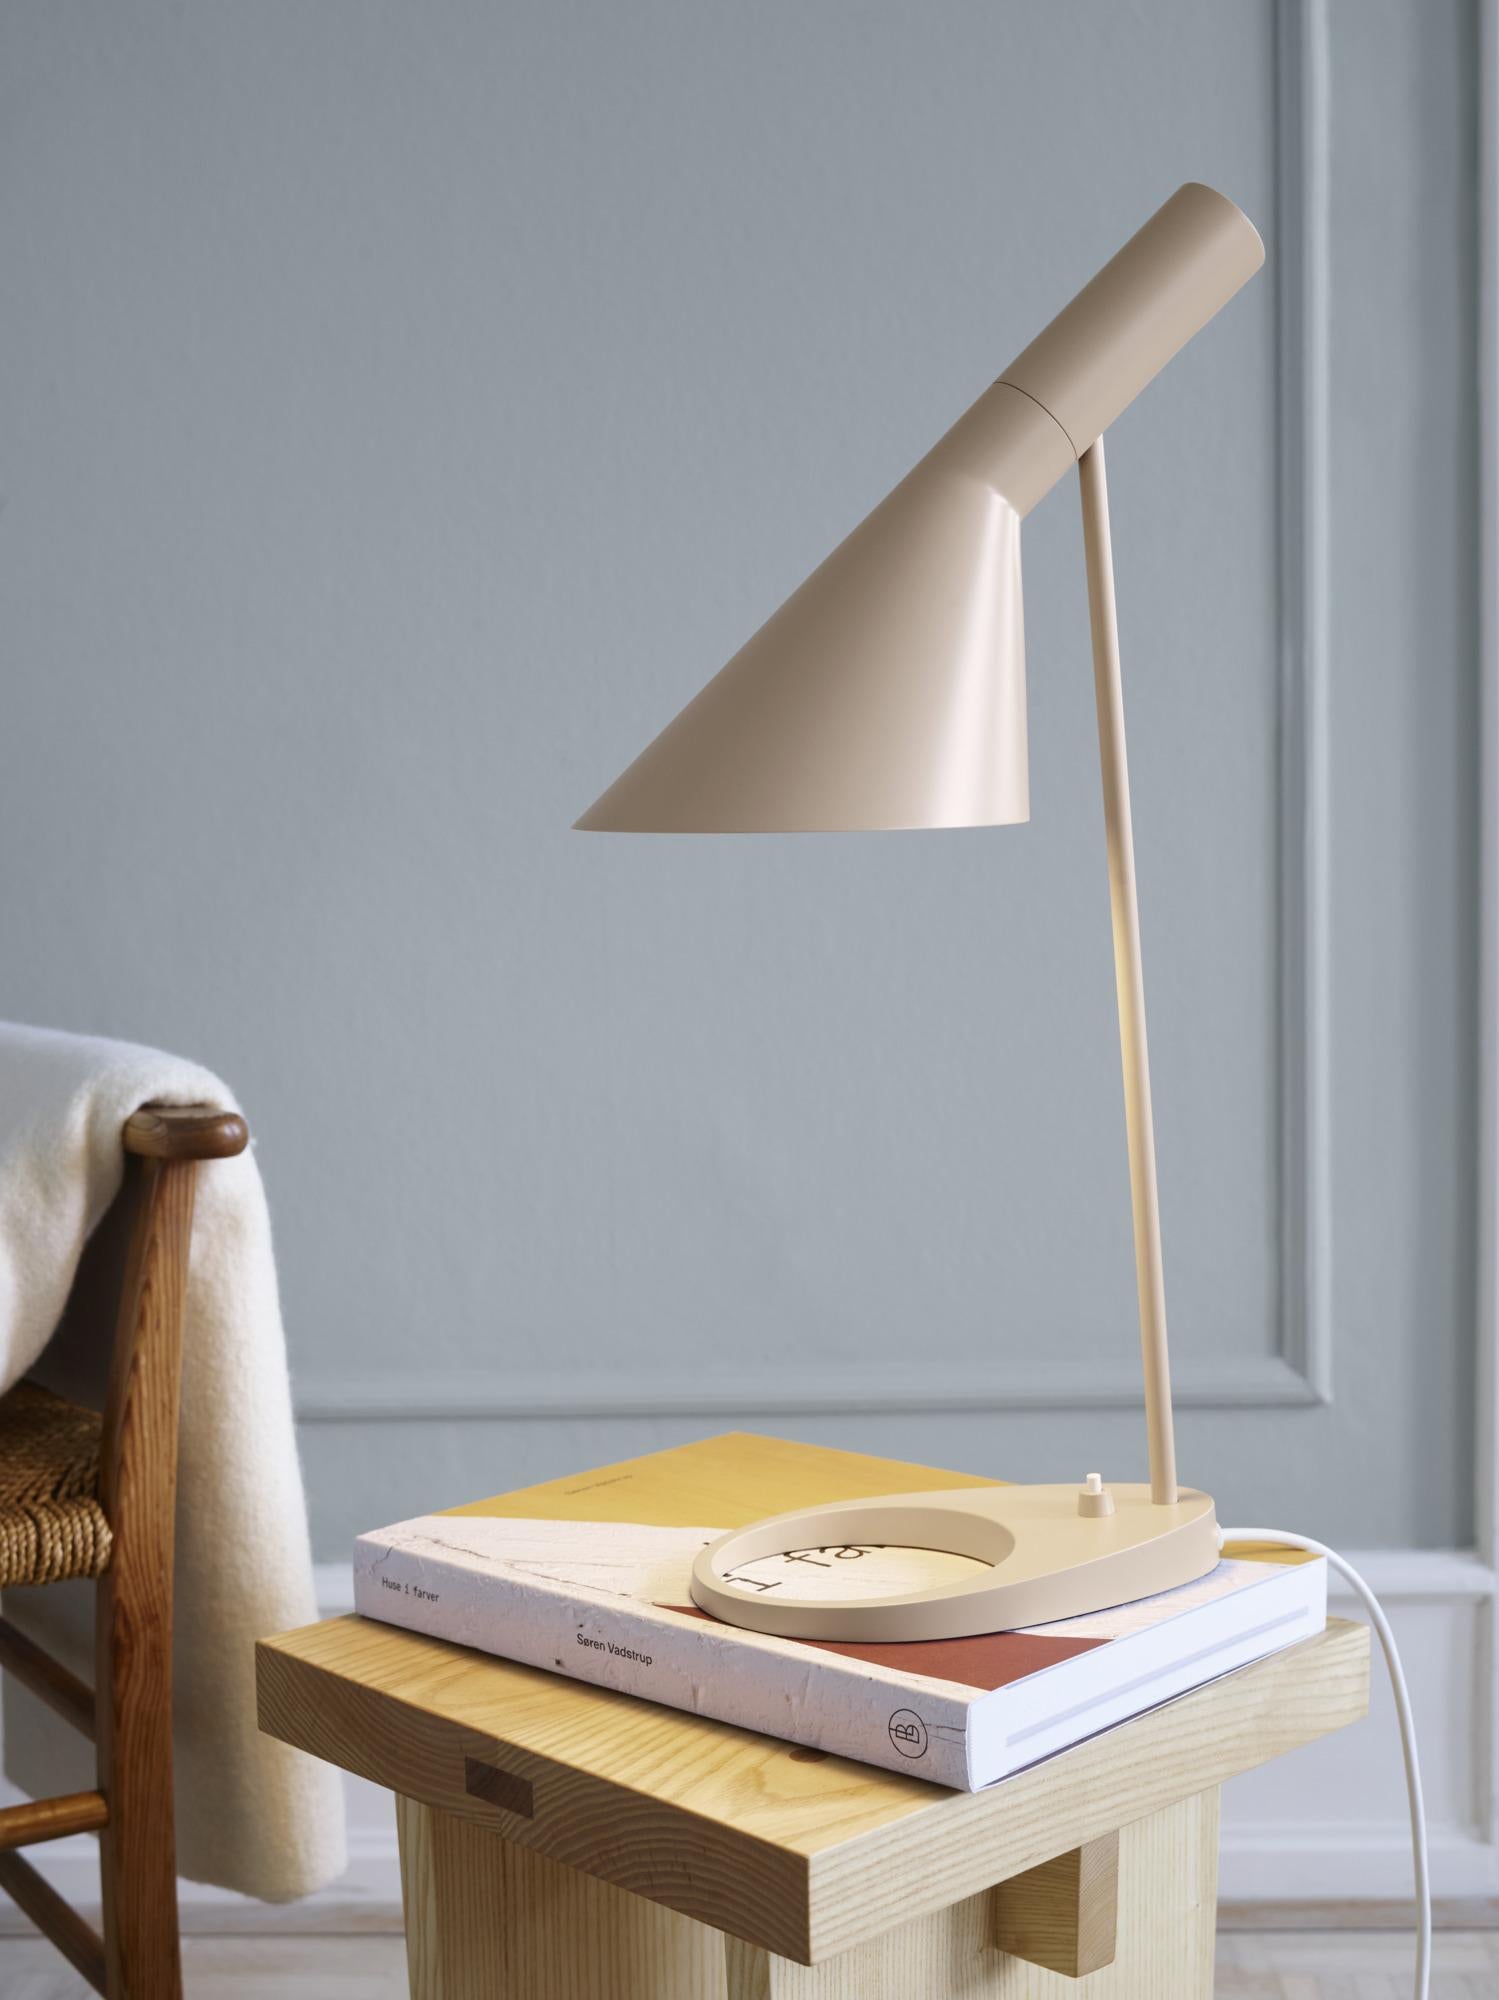 Arne Jacobsen AJ table lamp in Warm Sand for Louis Poulsen. 

The AJ series was part of the lighting collection renowned Danish designer Arne Jacobsen created for the original SAS Royal Hotel in 1957. Today, his furniture and lighting designs are